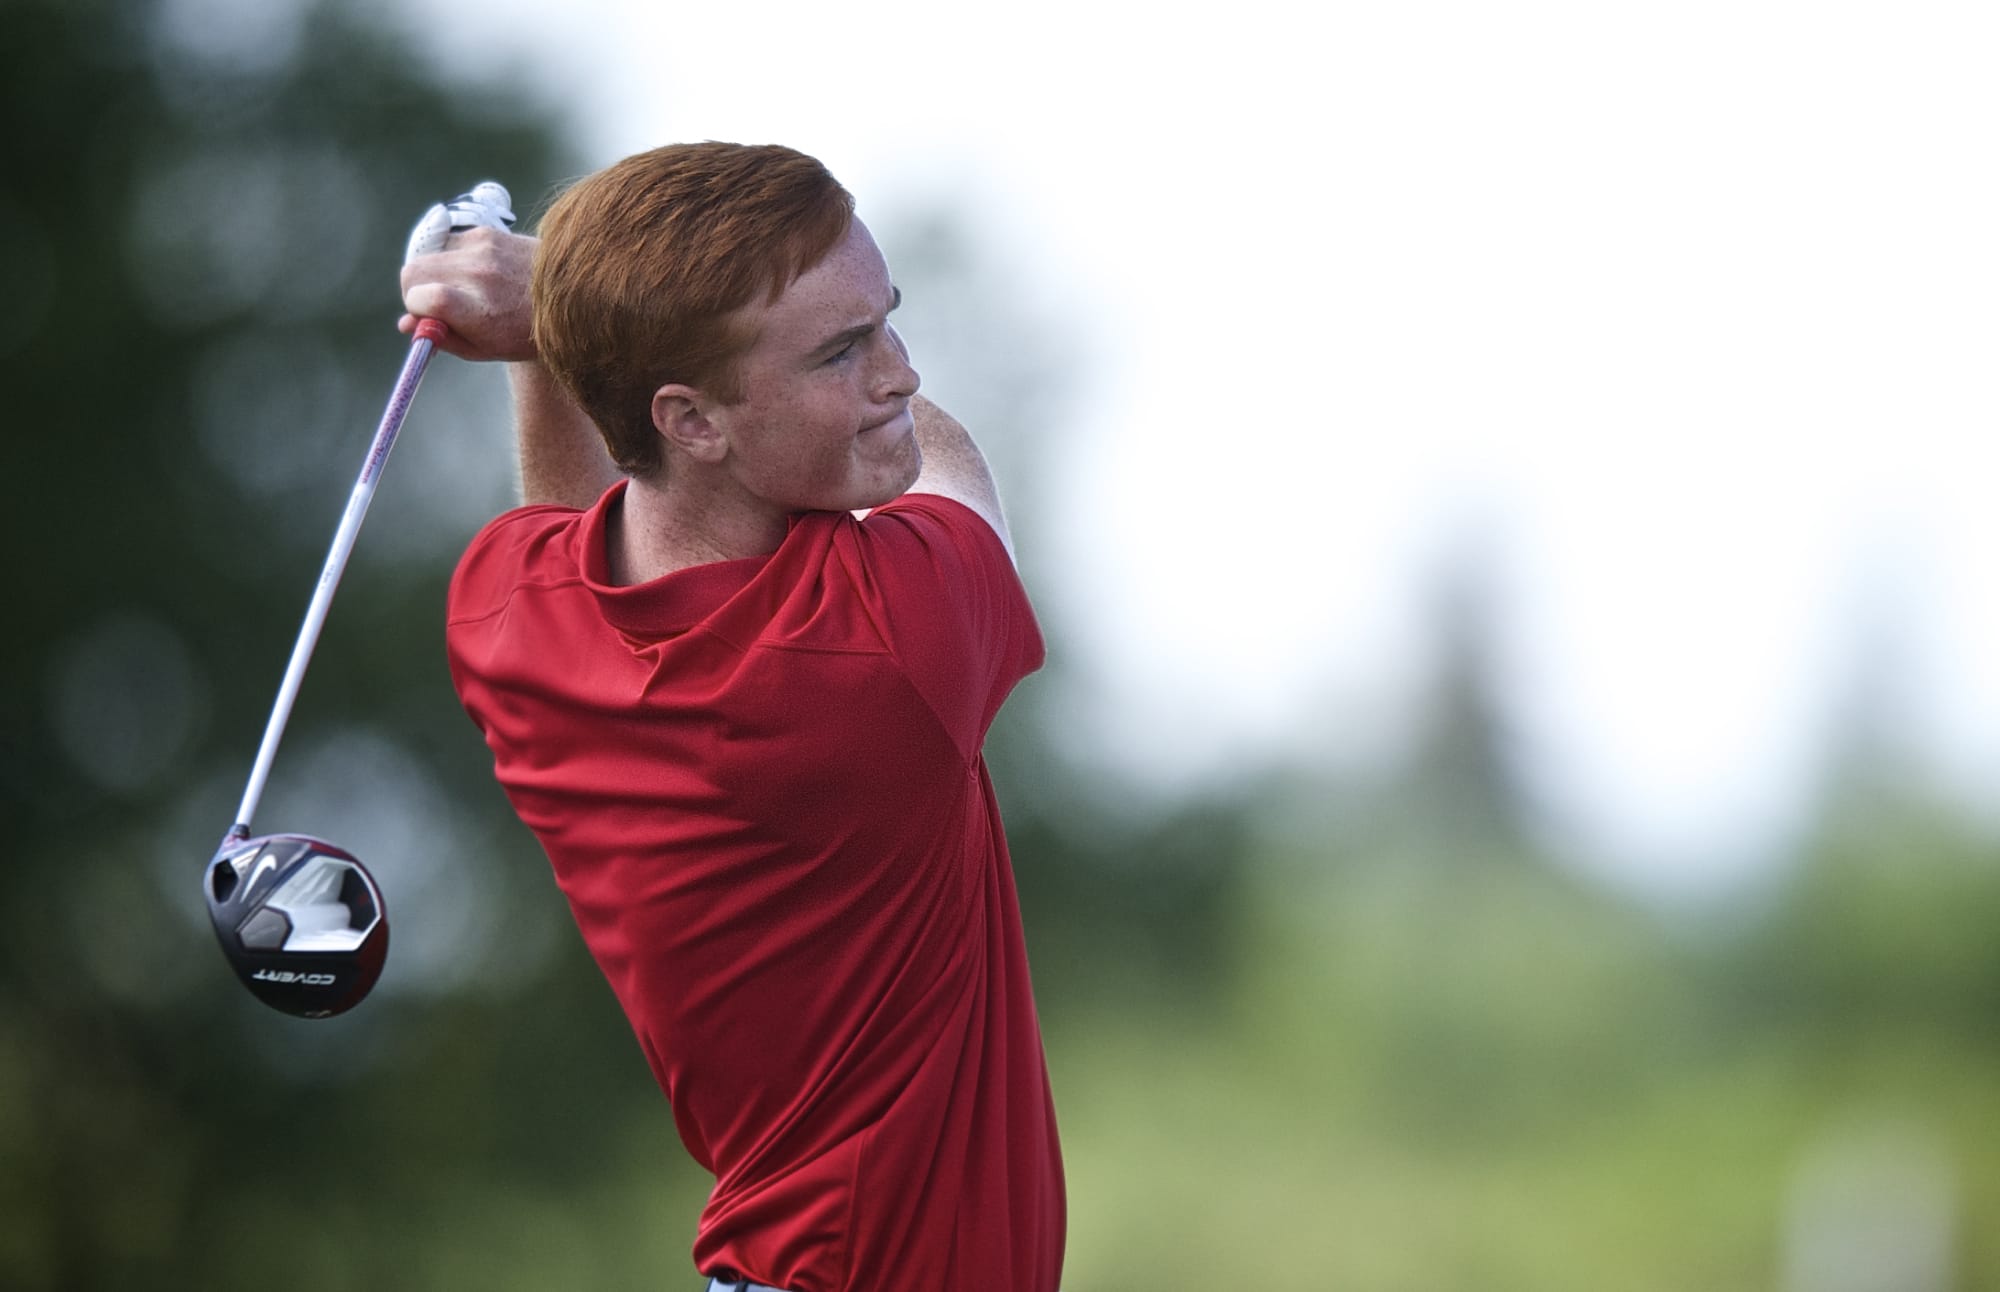 Brian Humphreys of Camas was all business en route to winning the Jeff Hudson Invitational on Tuesday.